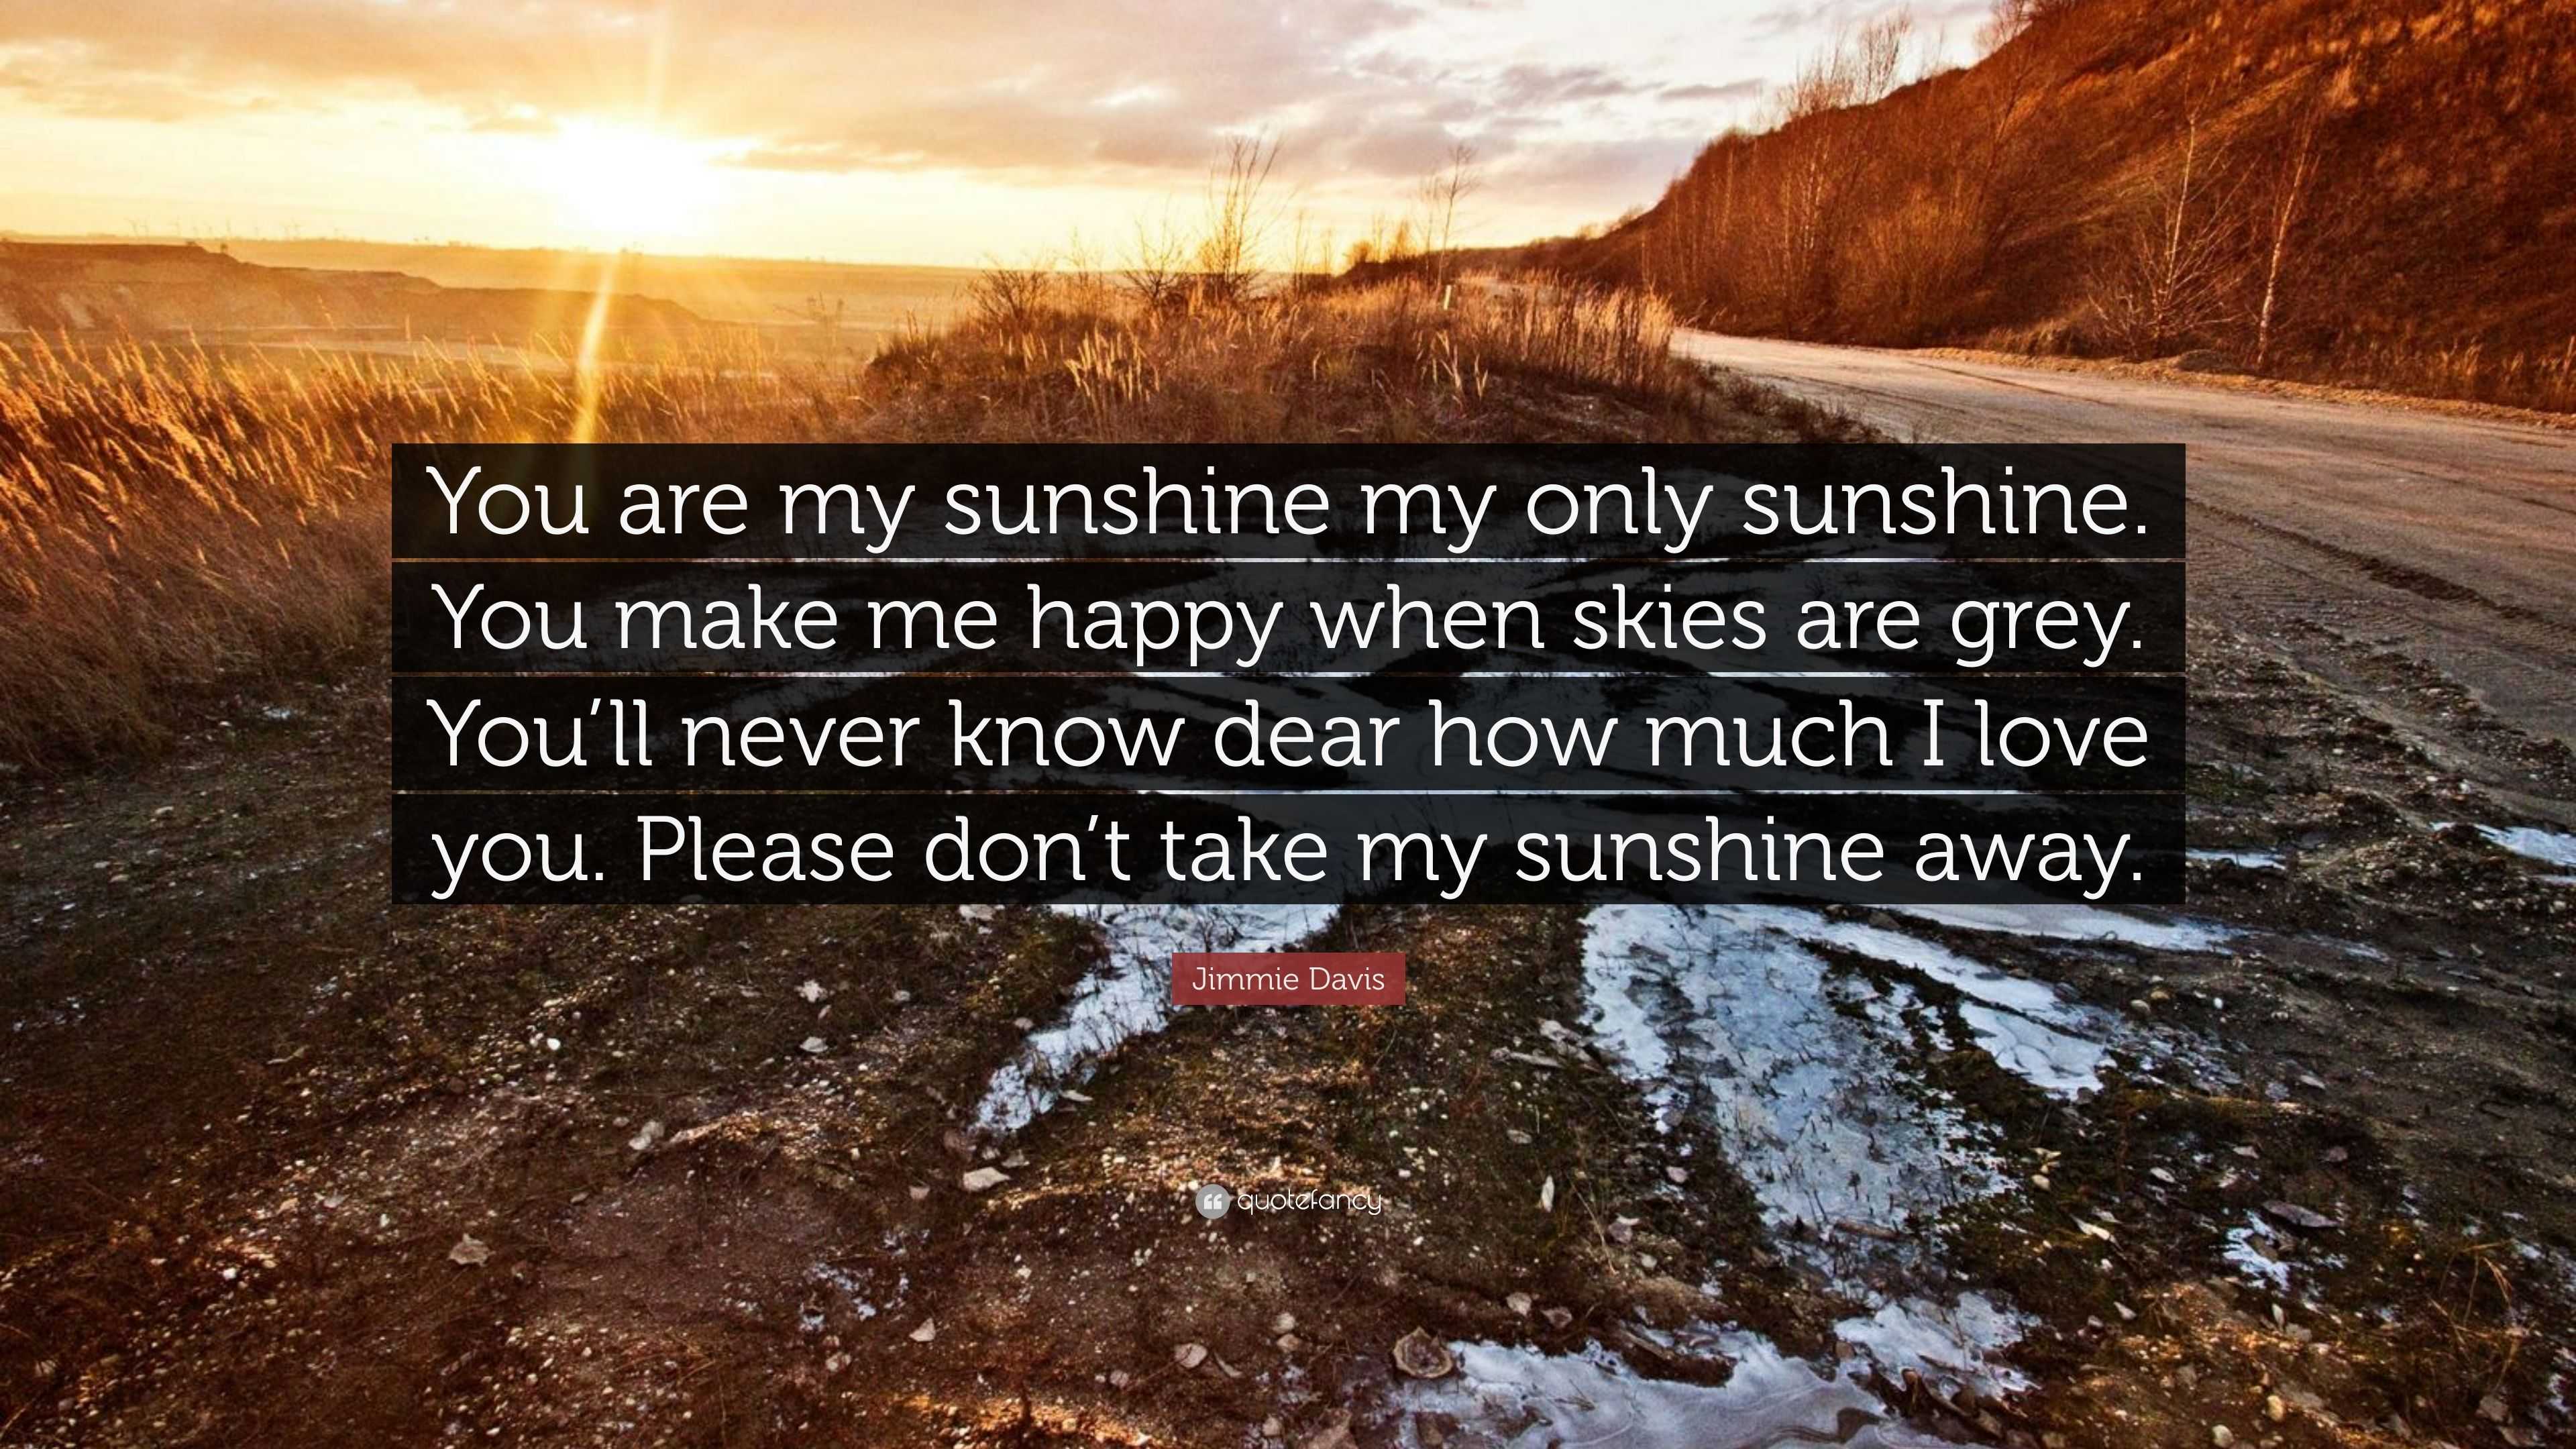 Jimmie Davis Quote: “You are my sunshine my only sunshine. You make me  happy when skies are grey. You'll never know dear how much I love you....”